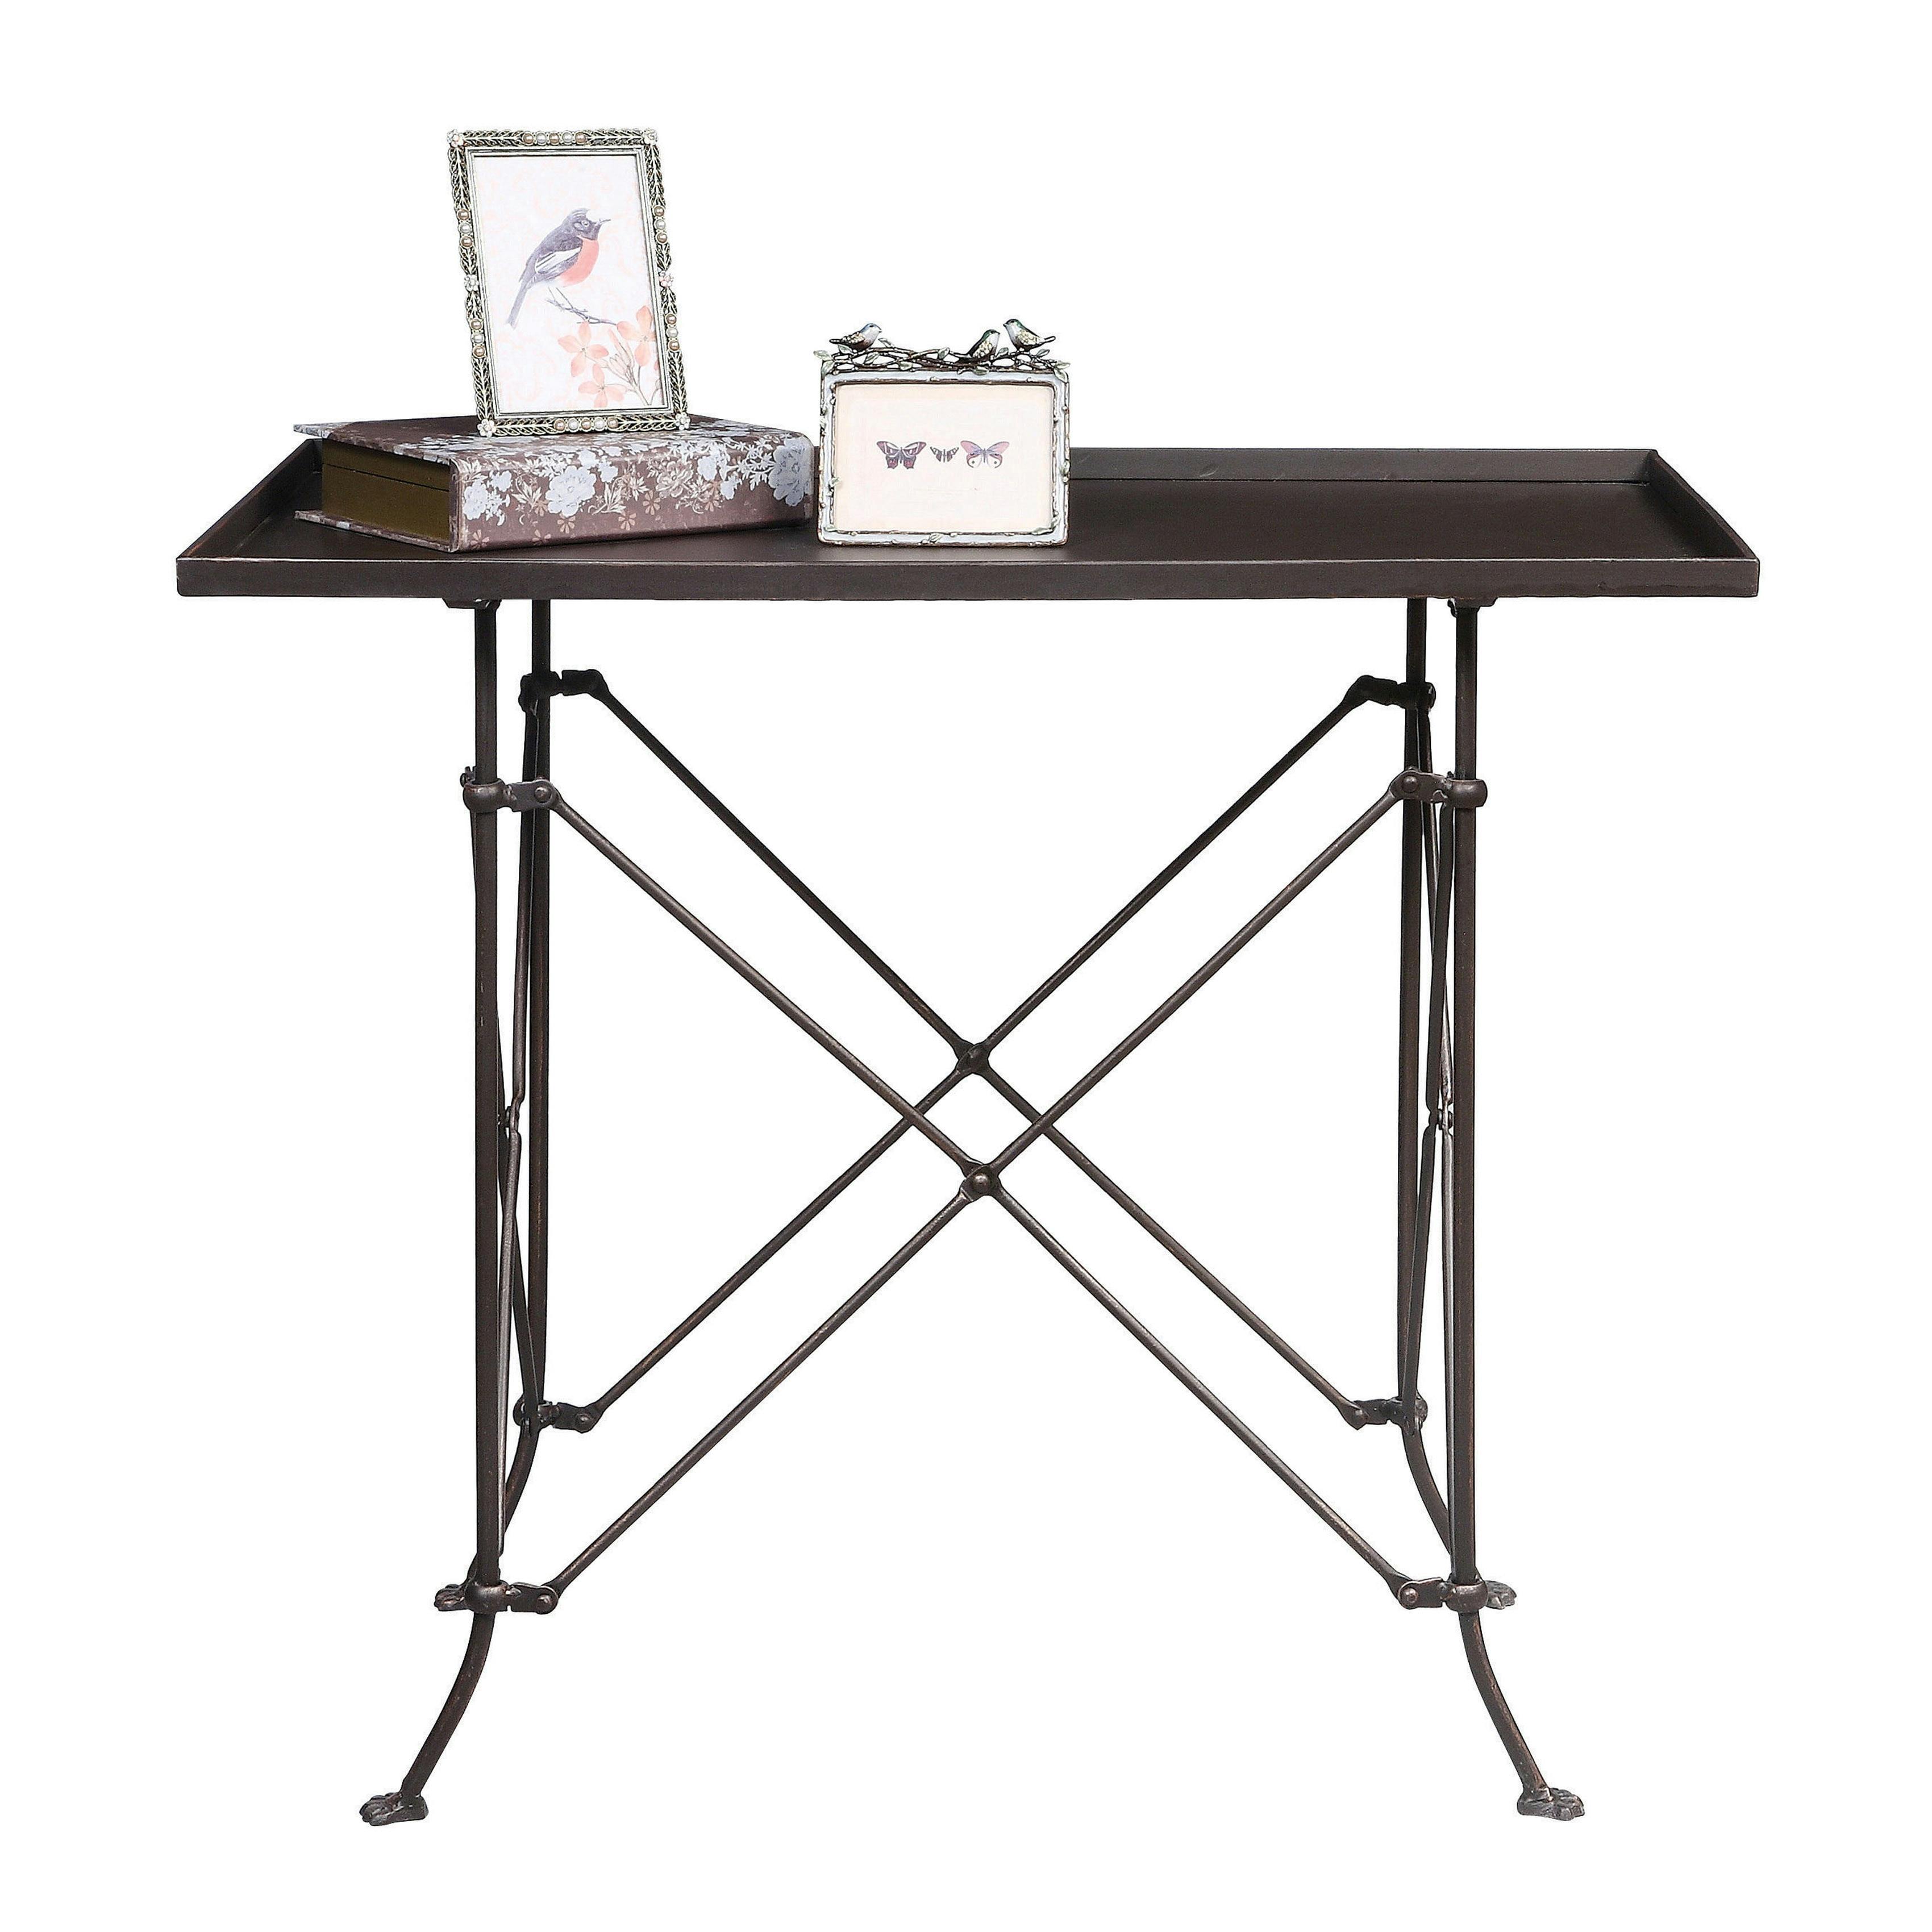 Elegant Bronze-Finish Metal Console Table with Storage Tray, 31.5"